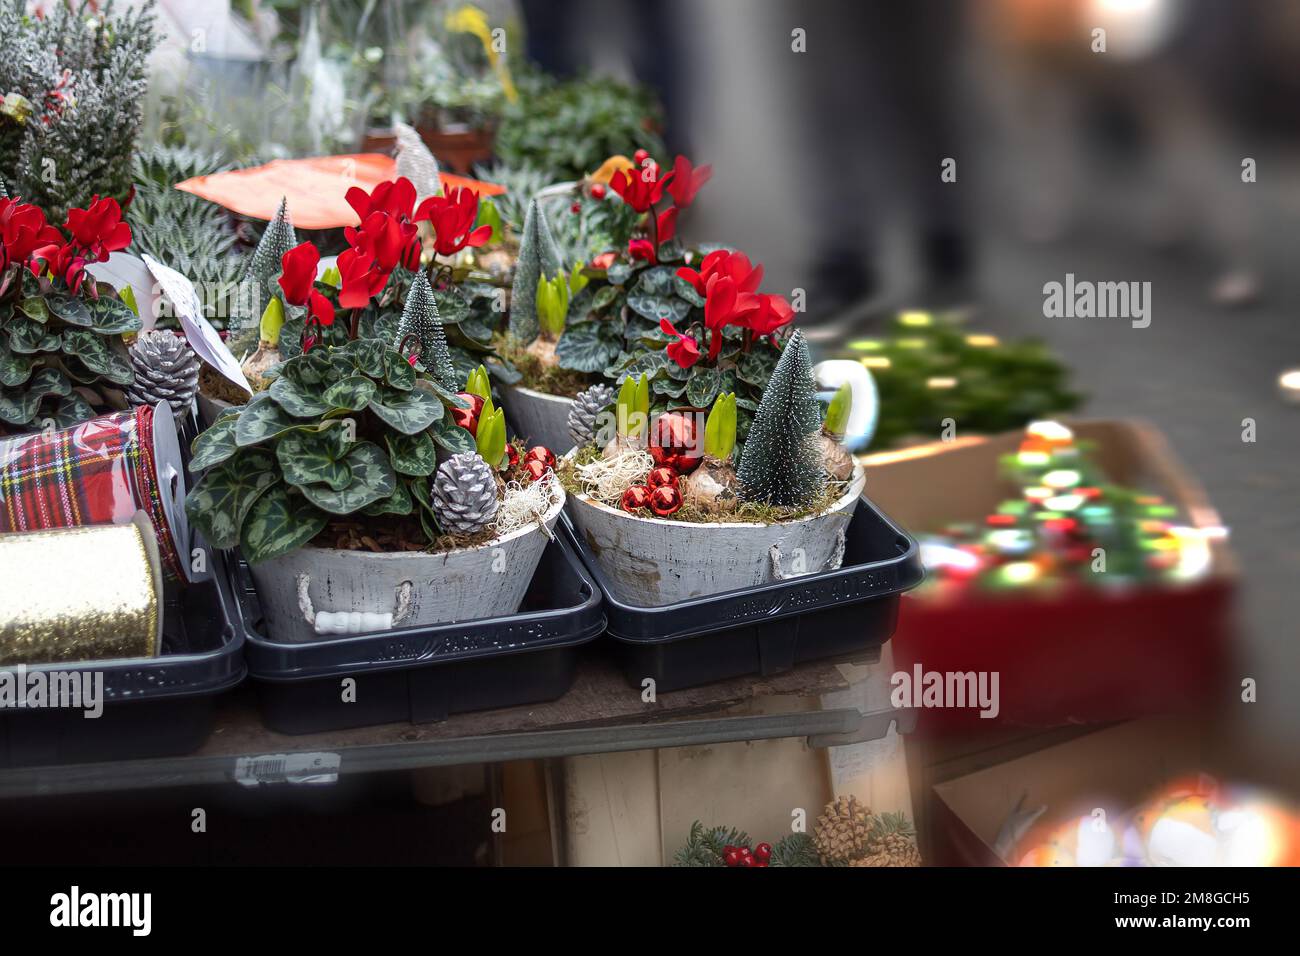 Christmas composition - red flowering cyclamens with small artificial Christmas trees in the snow and potted pine cones. The backdrop is blurred Stock Photo